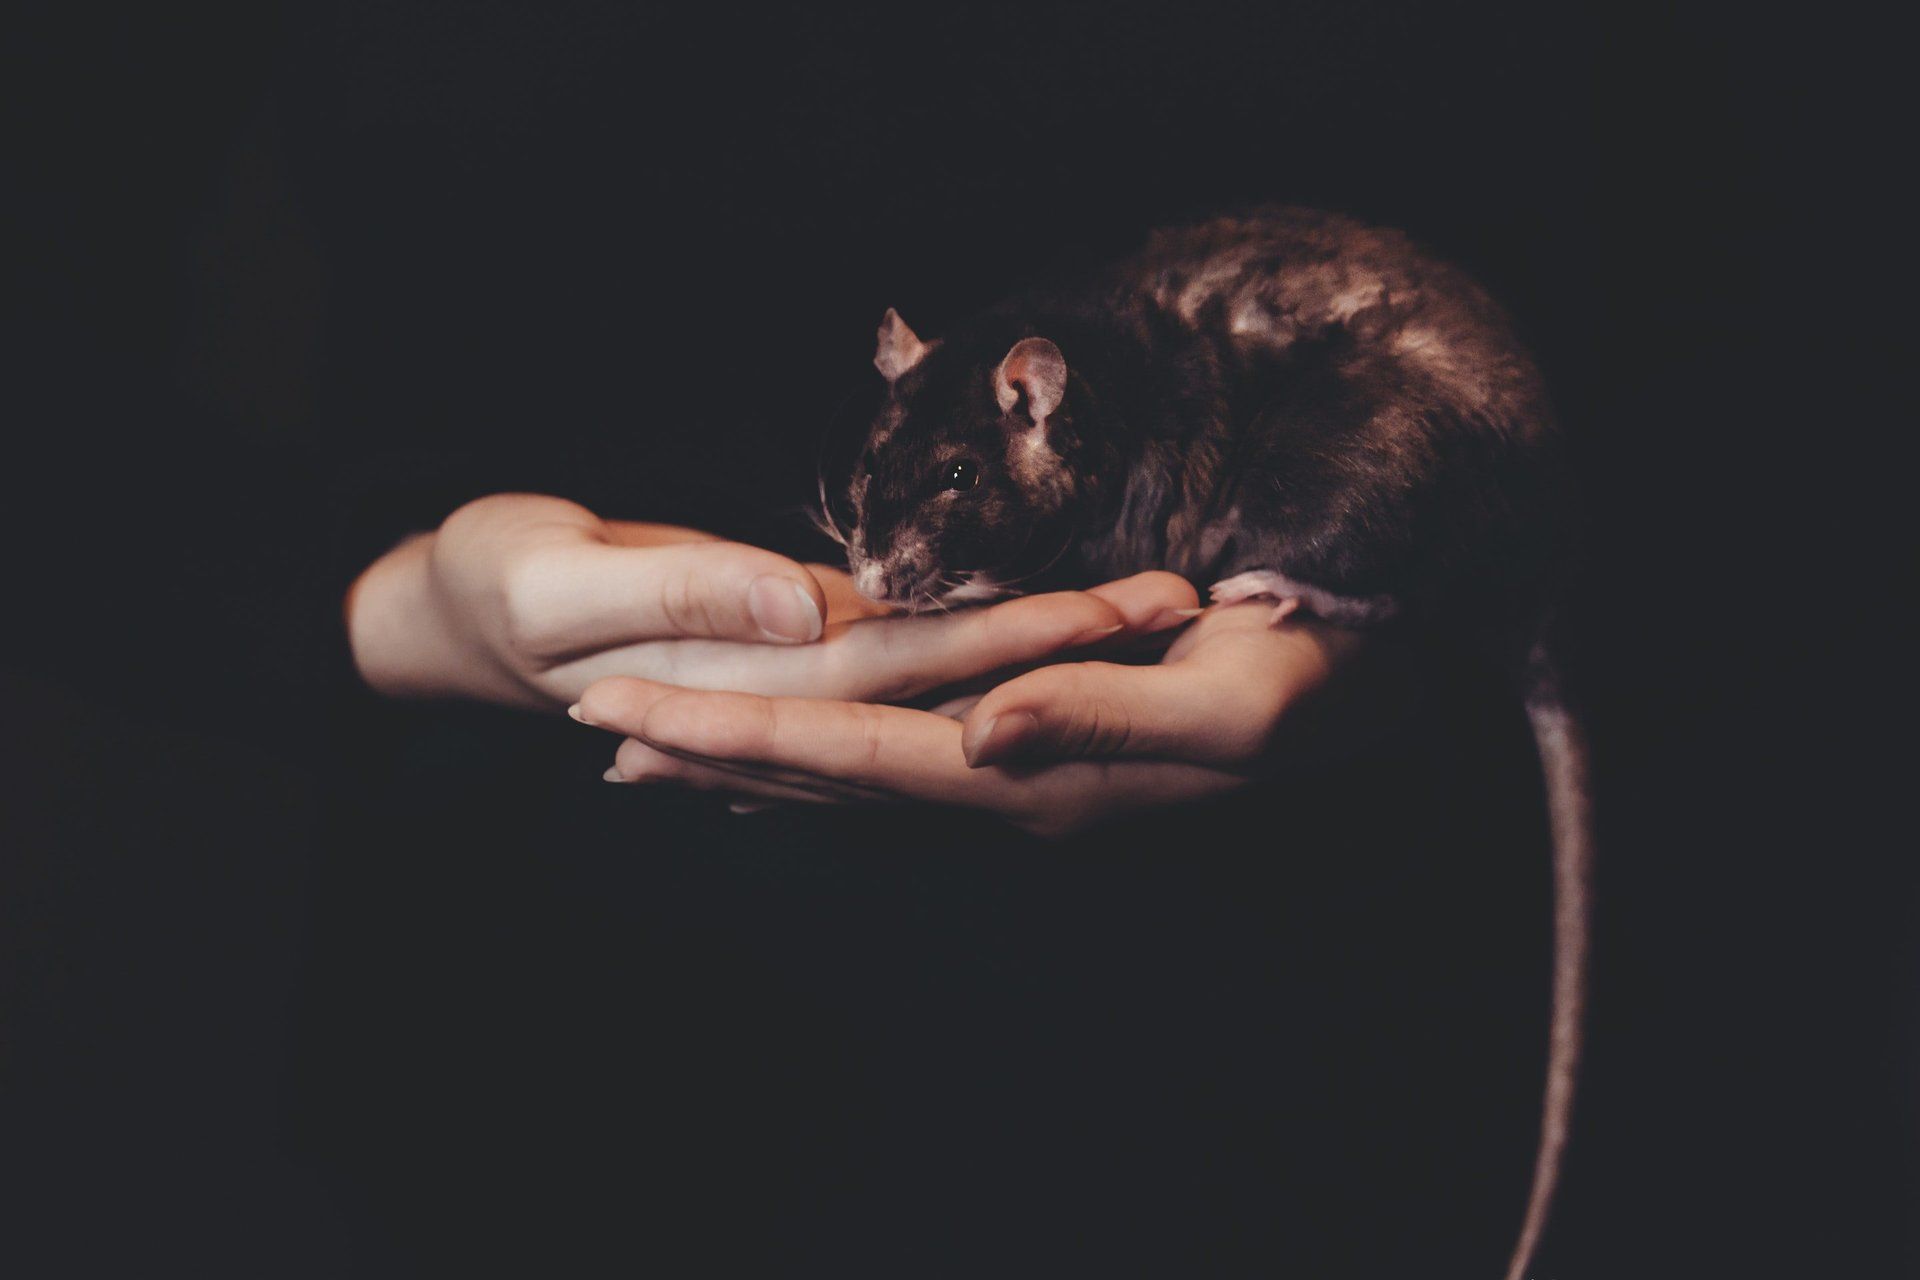 black pet store rats in a person's hands